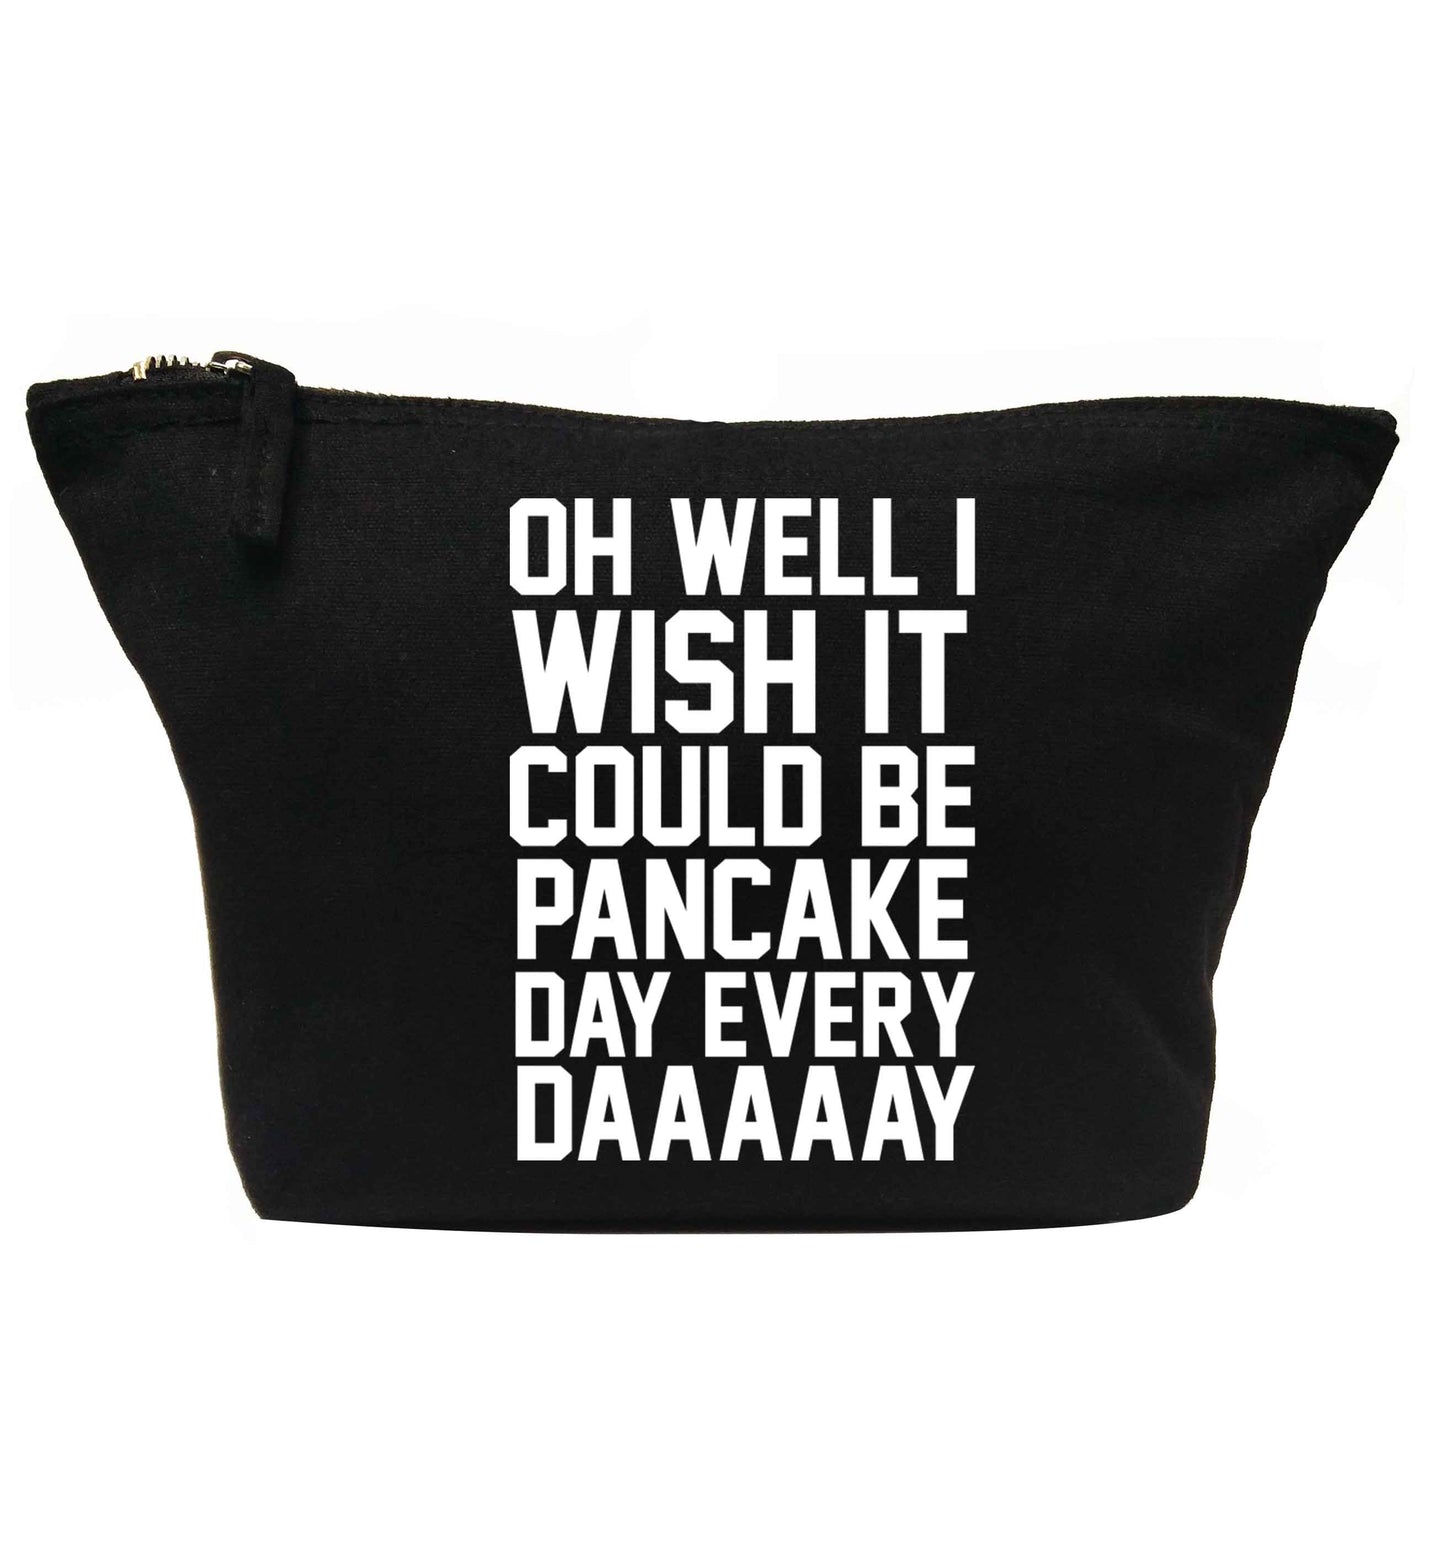 Oh well I wish it could be pancake day every day | Makeup / wash bag